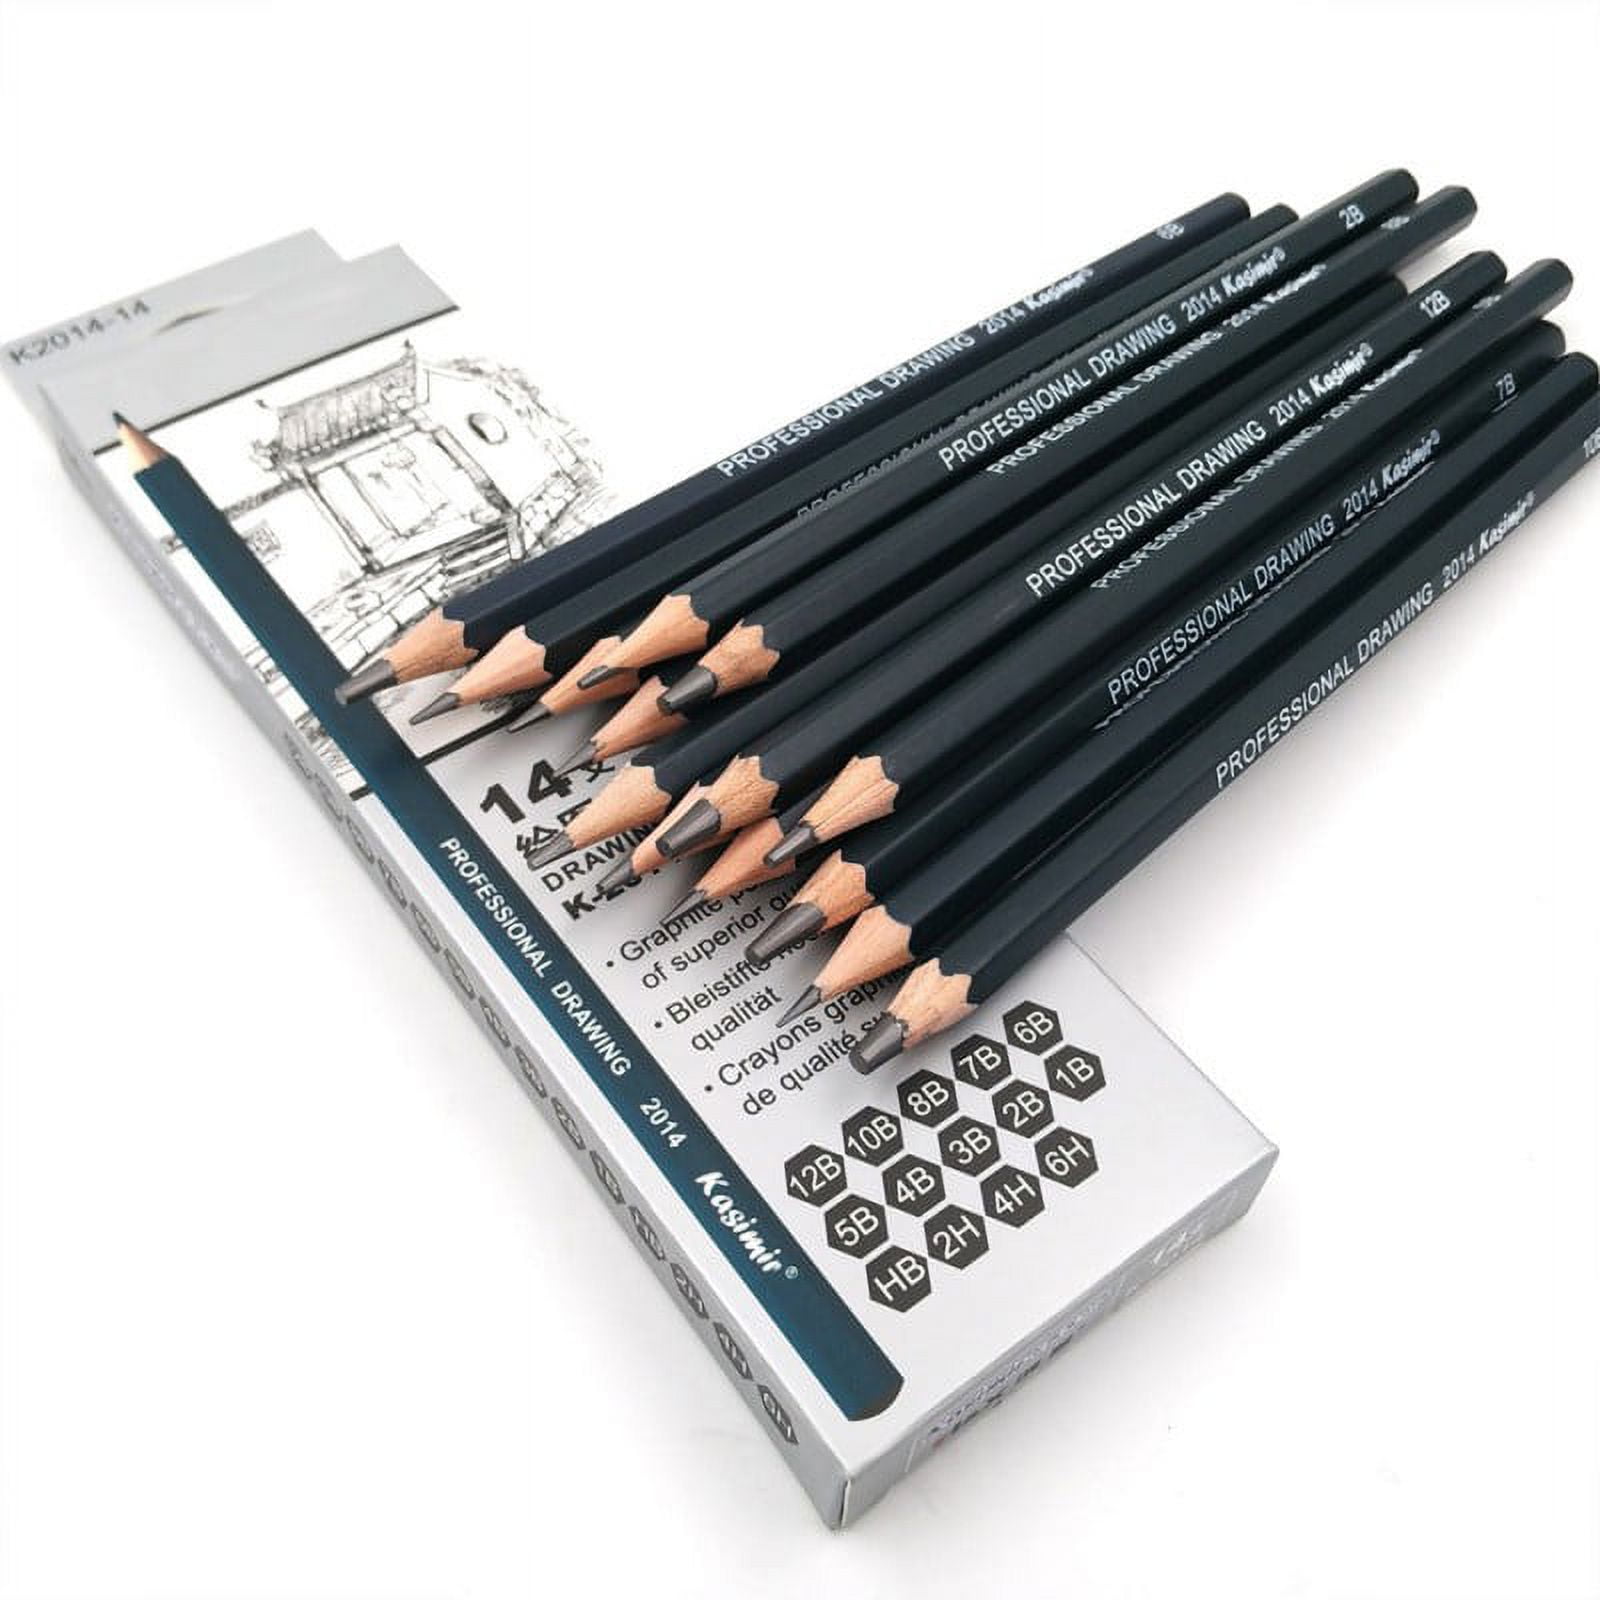 Bview Art 84-piece Drawing Set, Sketch Set With Graphite & Carbon